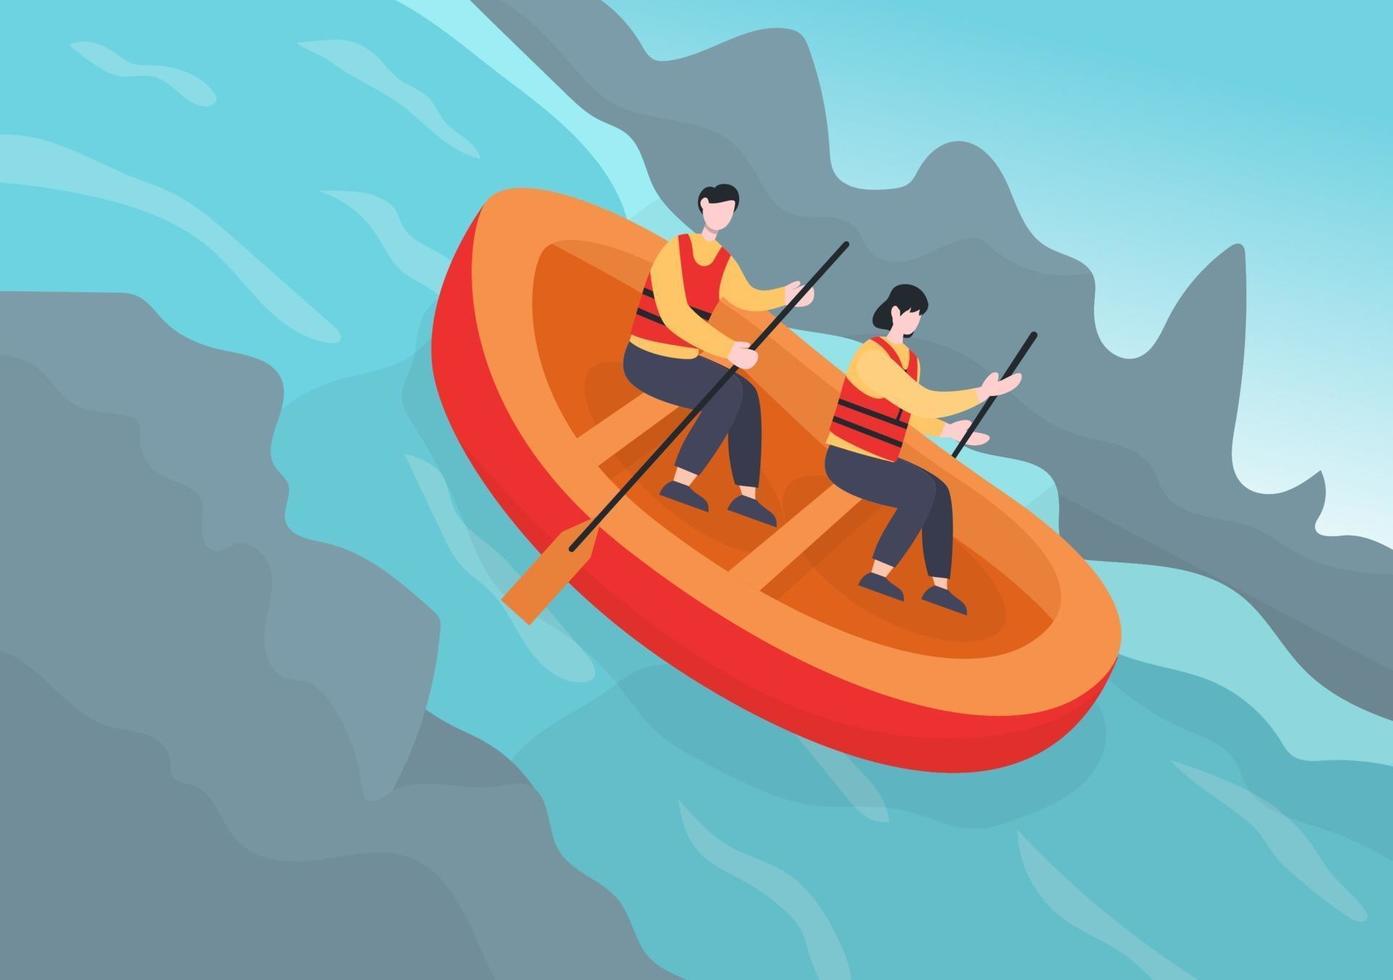 Rafting, Canoeing, Kayaking in the River Vector Illustration